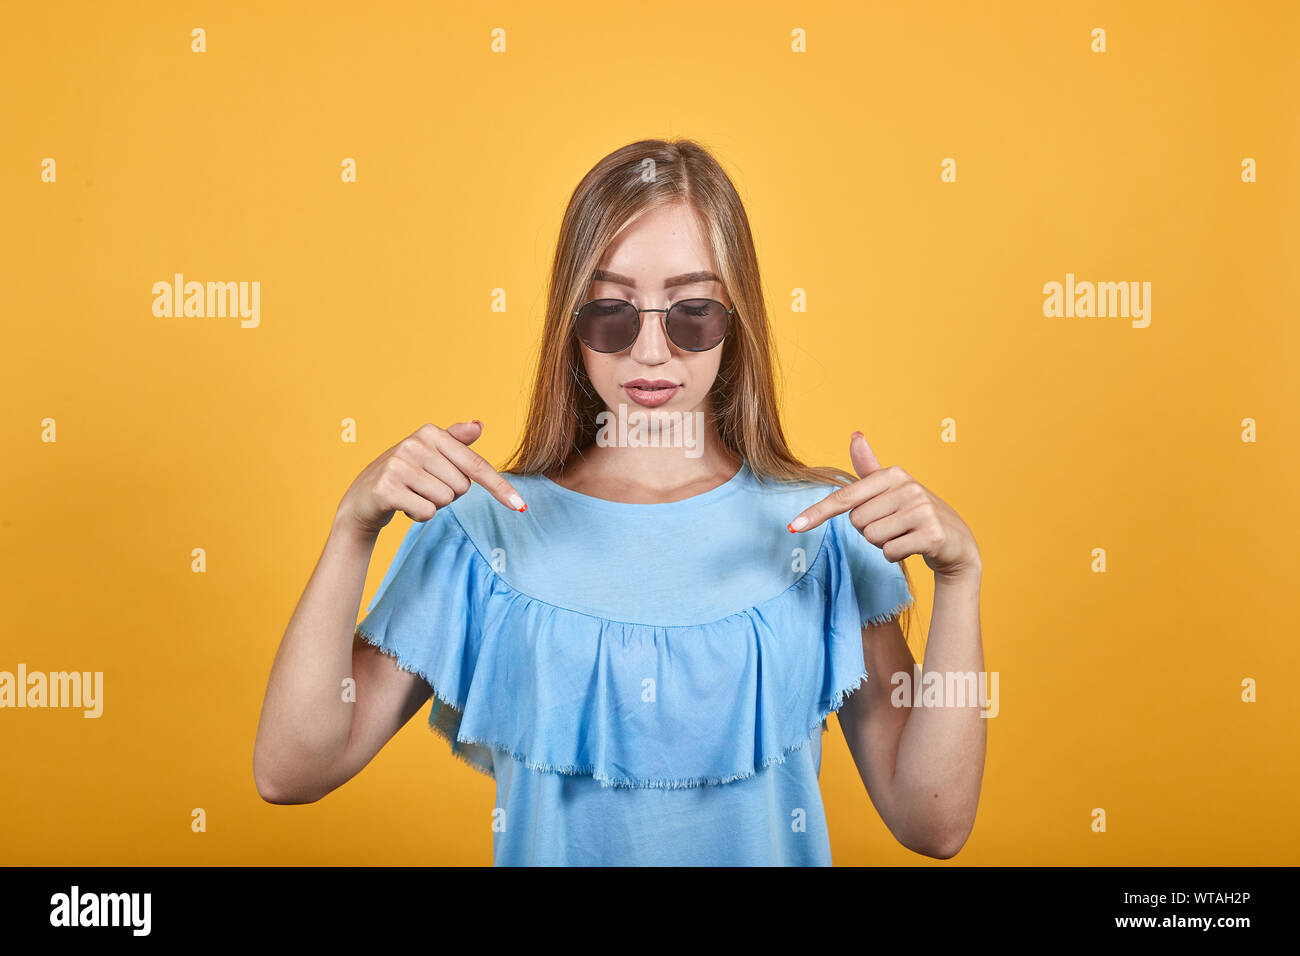 girl brunette in blue t-shirt over isolated orange background shows emotions Stock Photo